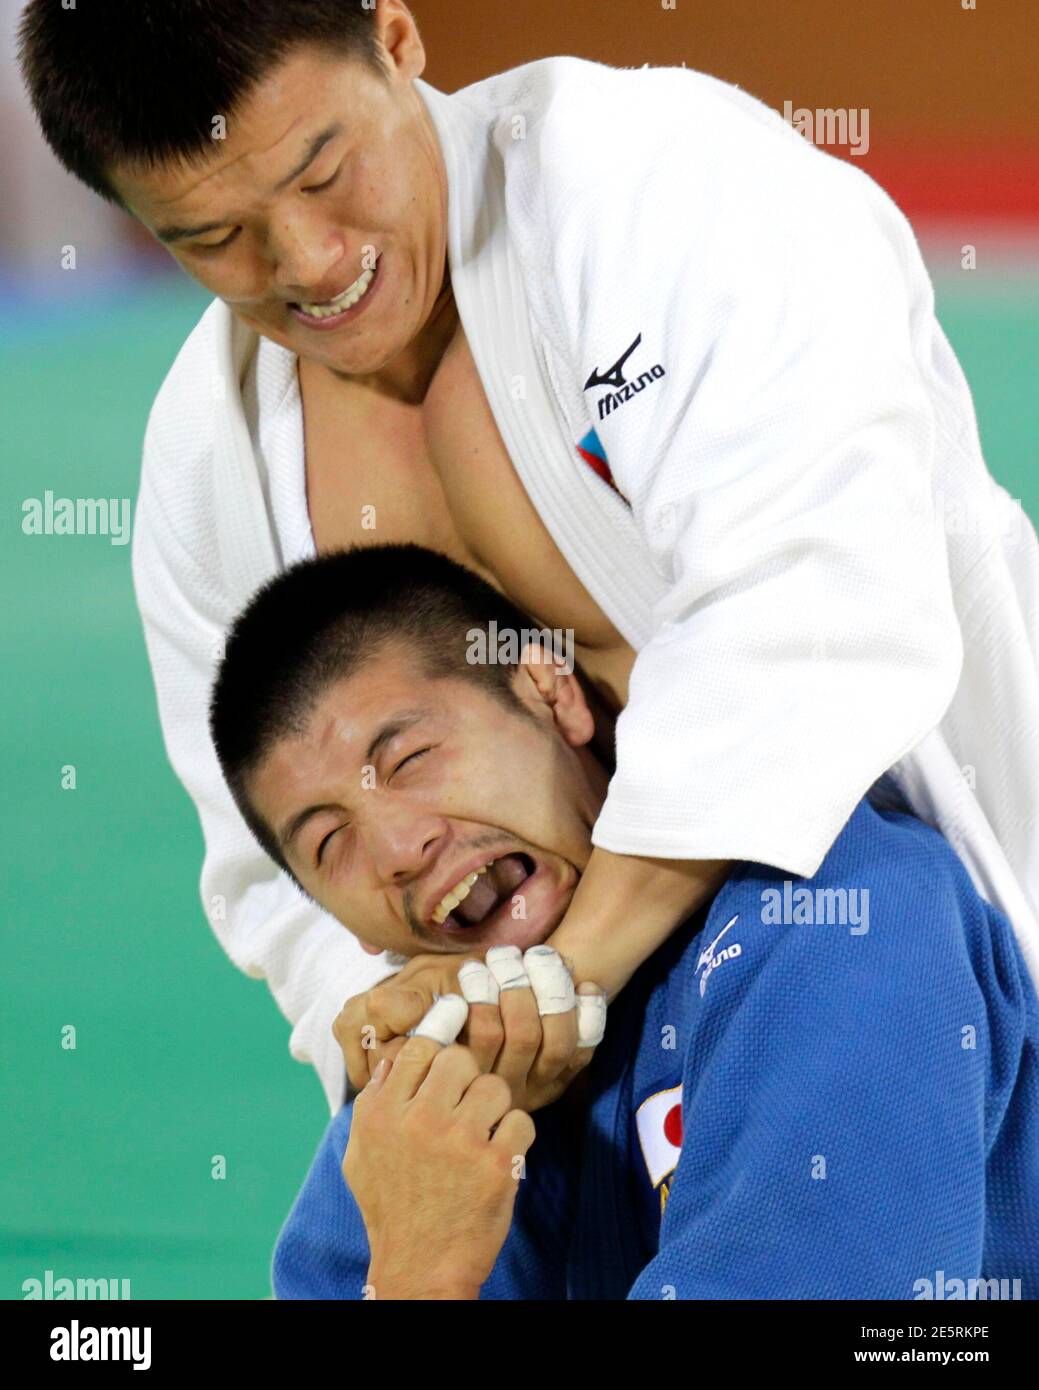 Mongolia's Uuganbaatar Otgonbaatar (top) competes with Japan's Masahiro Takamatsu during the men's -81kg judo competition at the 16th Asian Games in Guangzhou, Guangdong province, November 14, 2010.   REUTERS/Jason Lee (CHINA  - Tags: SPORT JUDO IMAGE OF THE DAY TOP PICTURE) Stock Photo